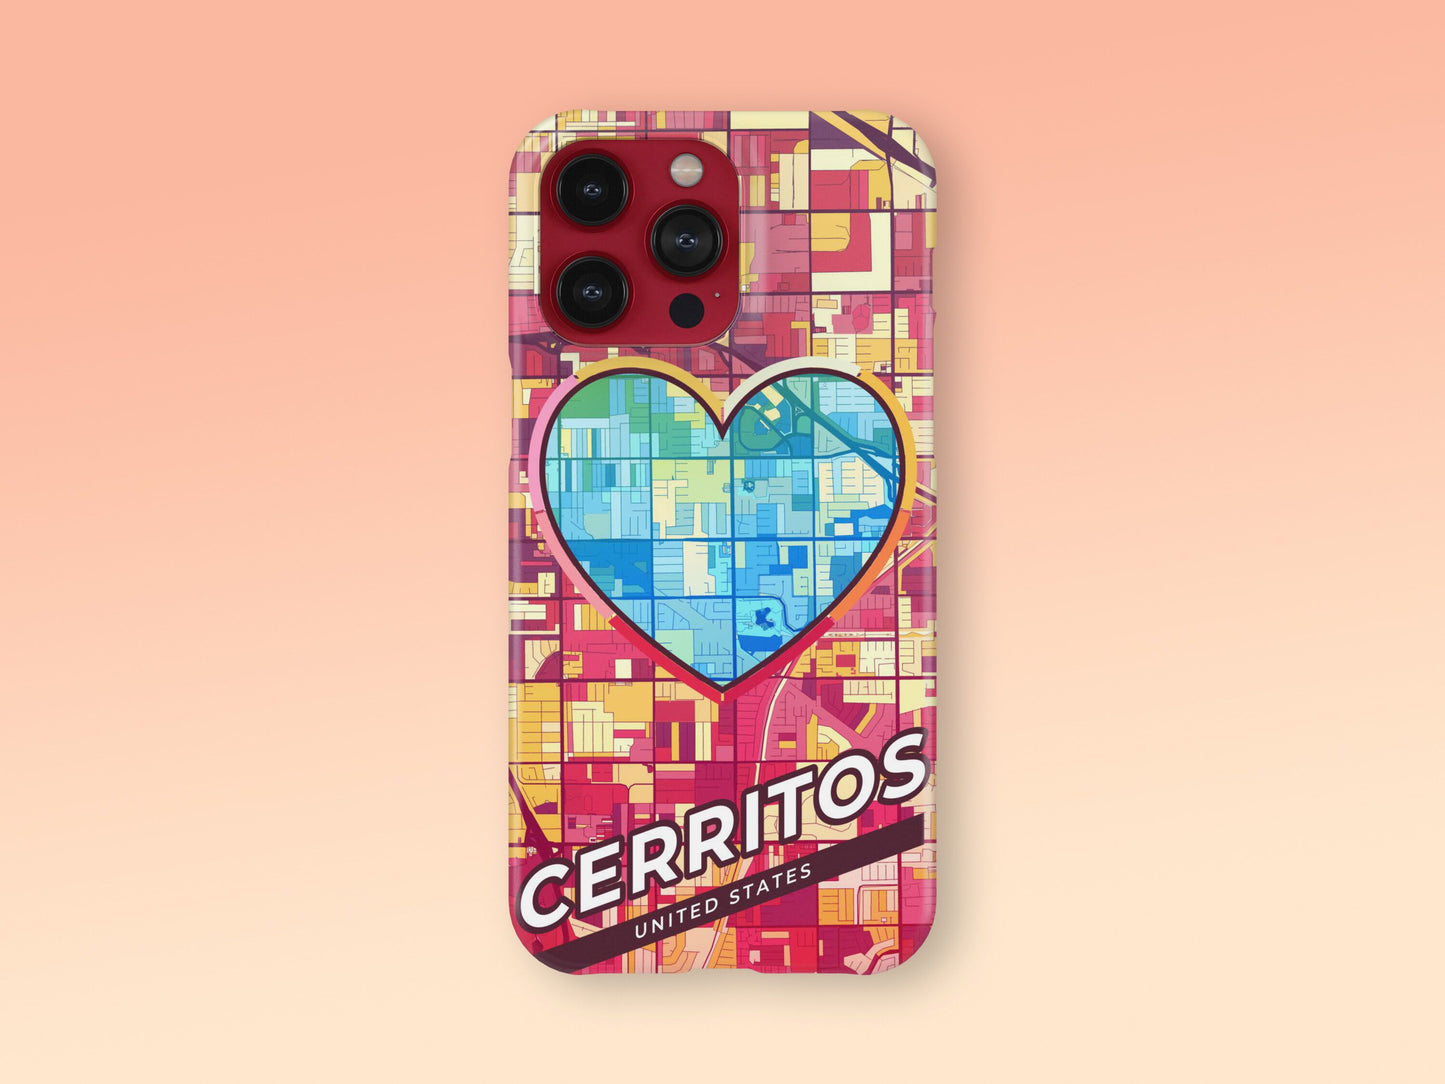 Cerritos California slim phone case with colorful icon. Birthday, wedding or housewarming gift. Couple match cases. 2